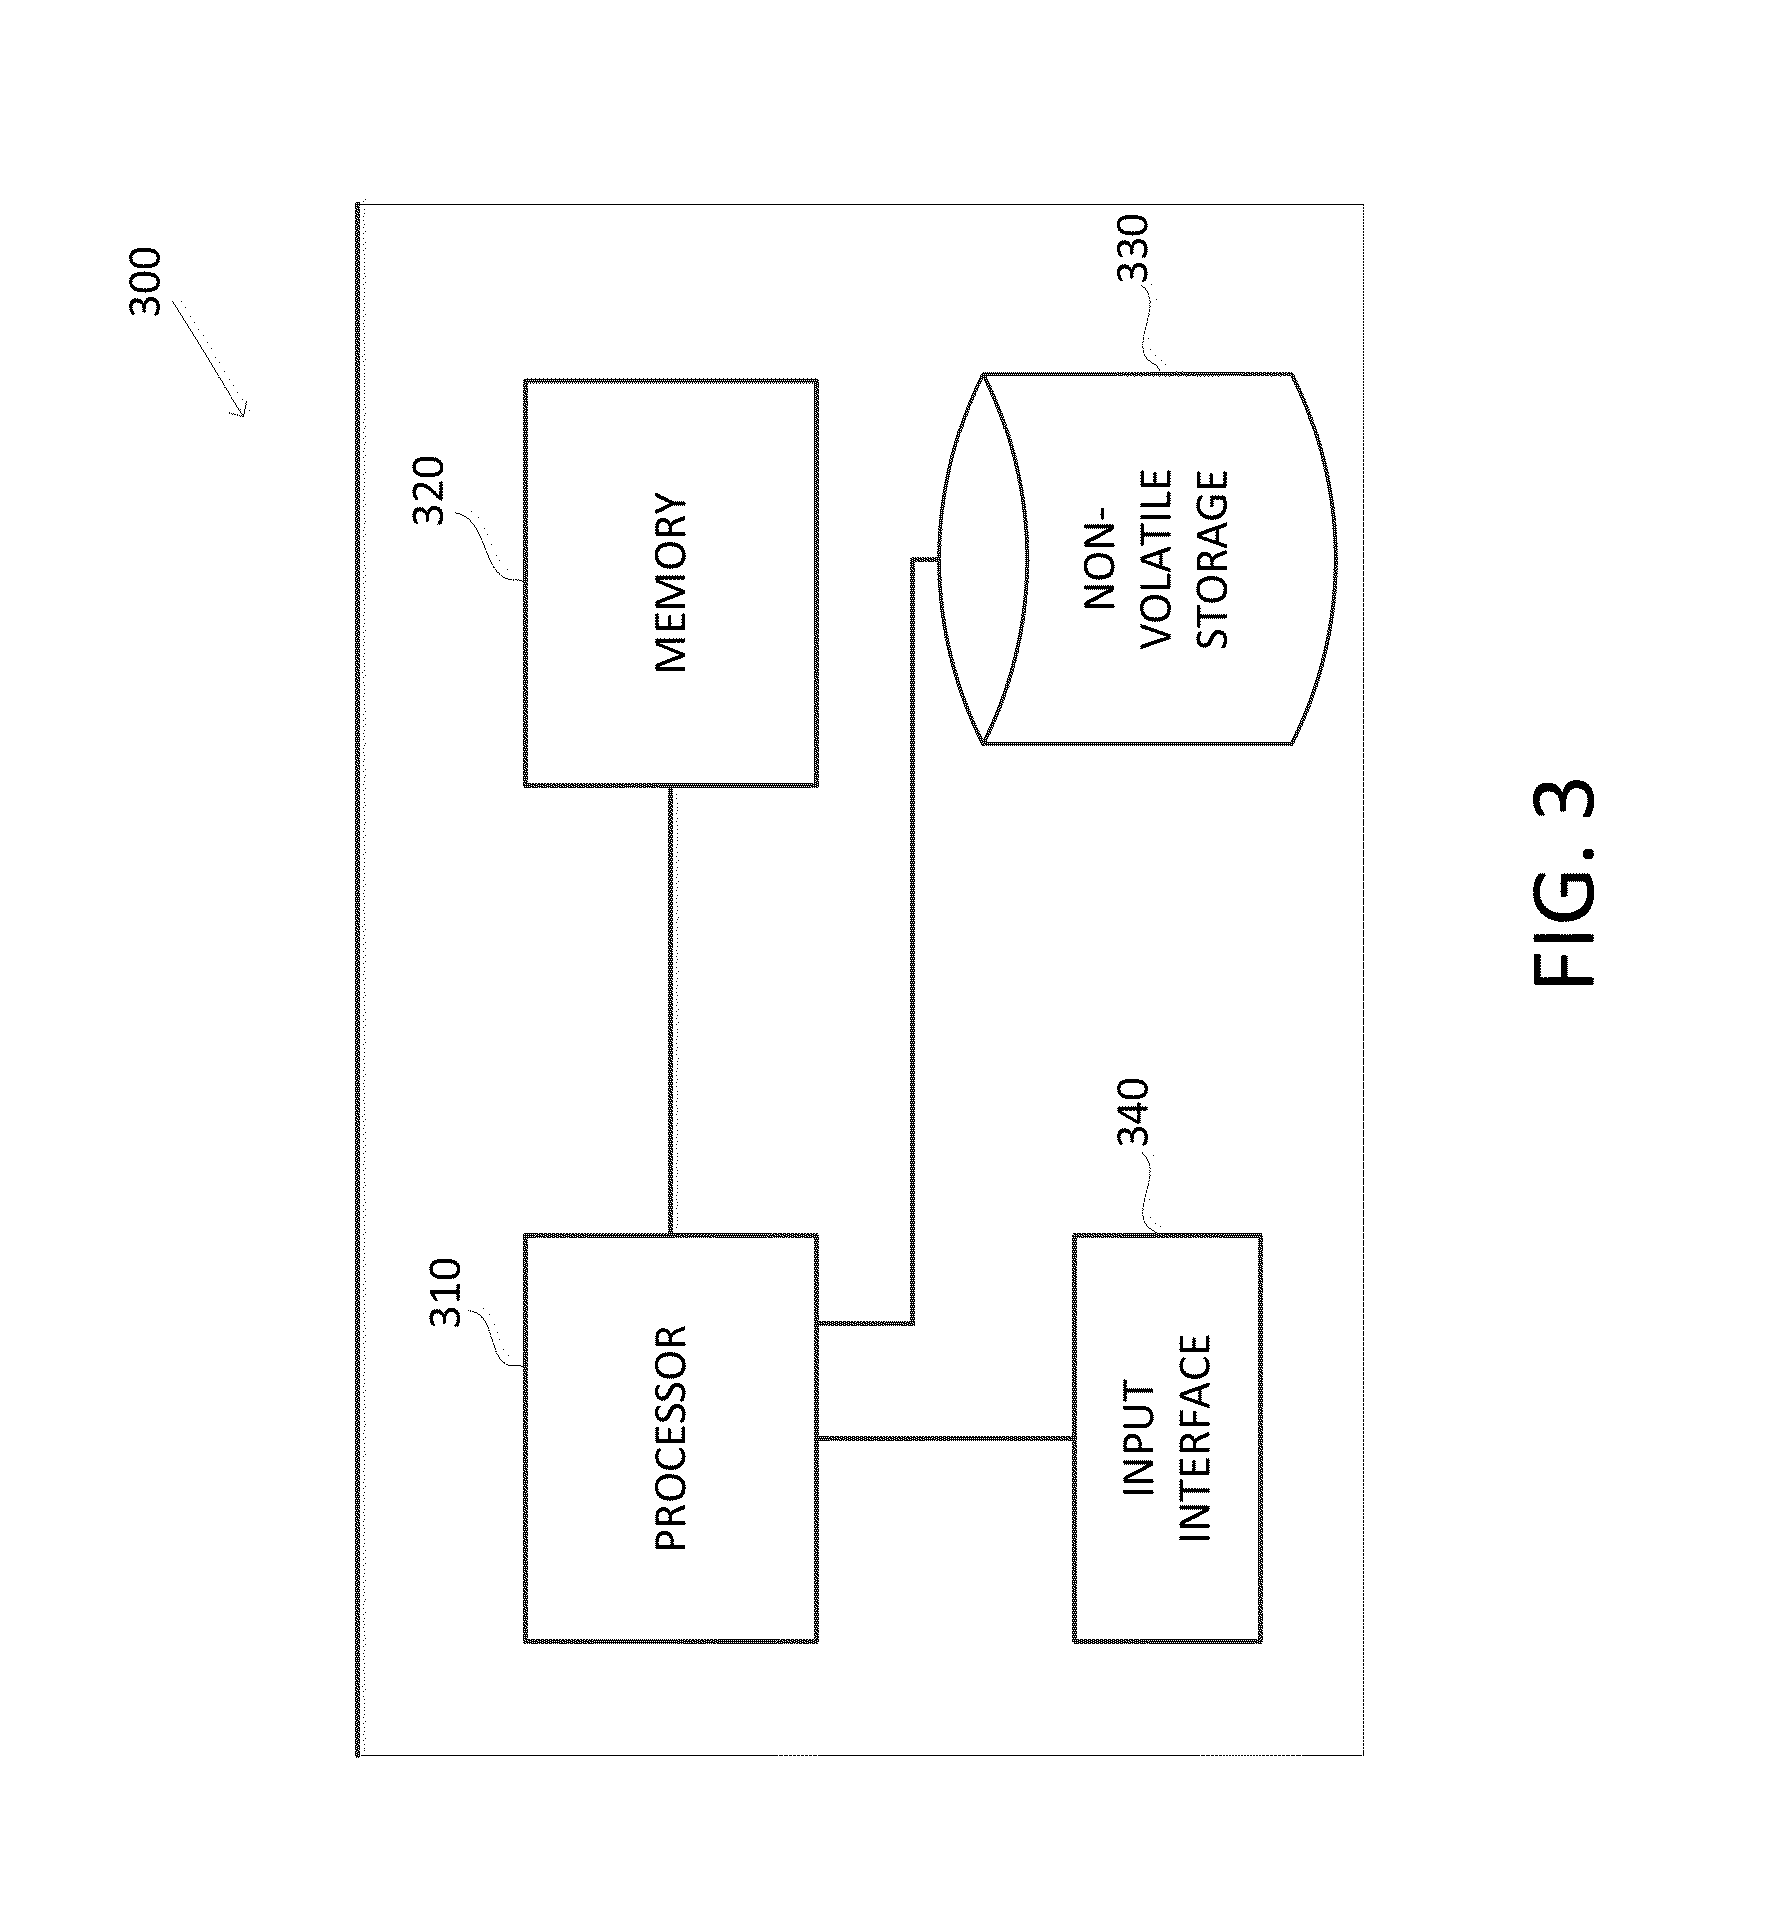 Methods and apparatuses for predicting risk of prostate cancer and prostate gland volume